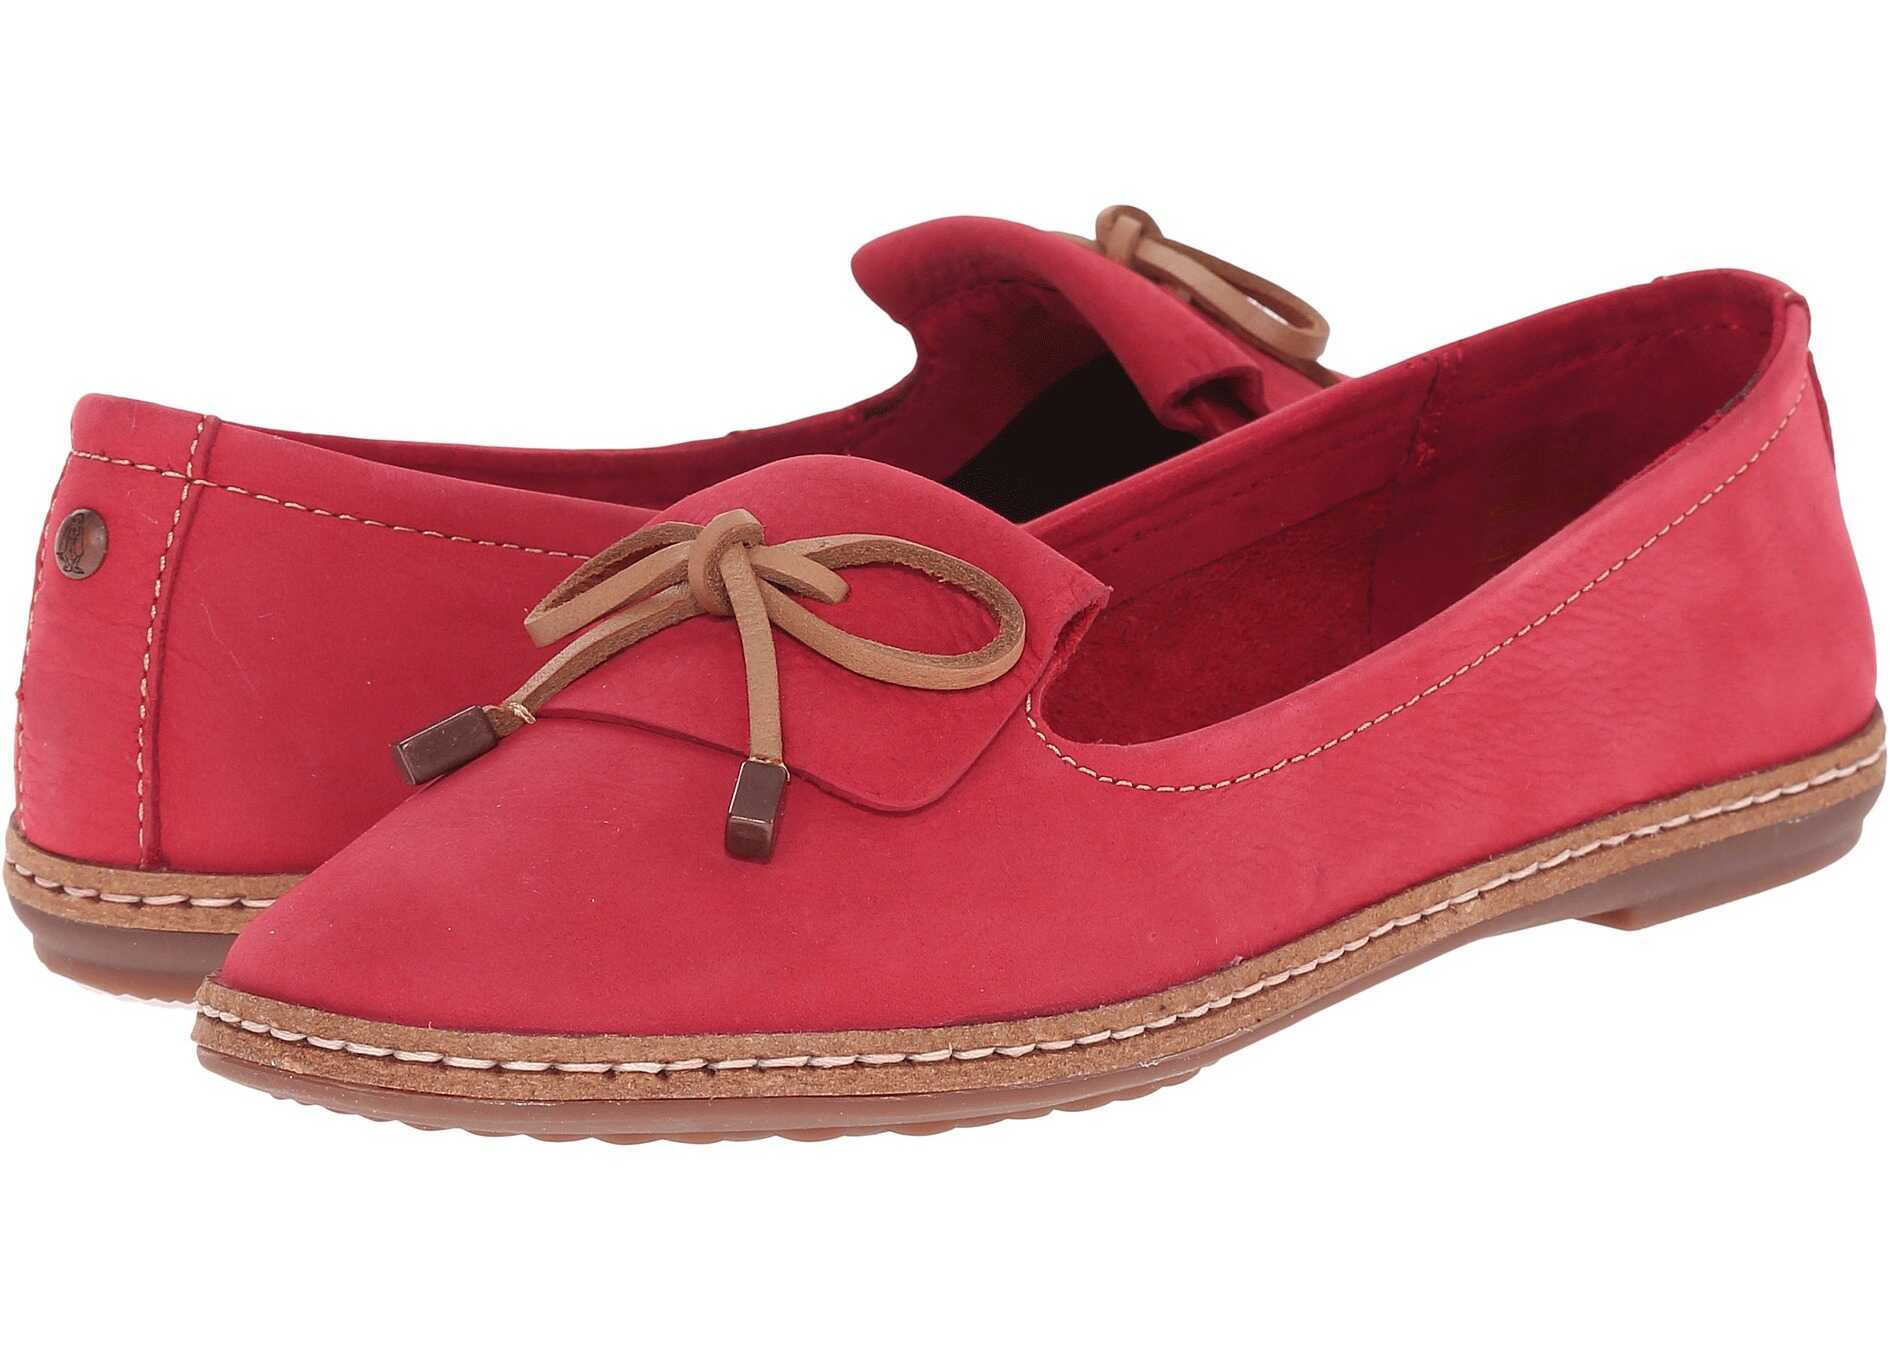 Hush Puppies Adena Piper Red Leather